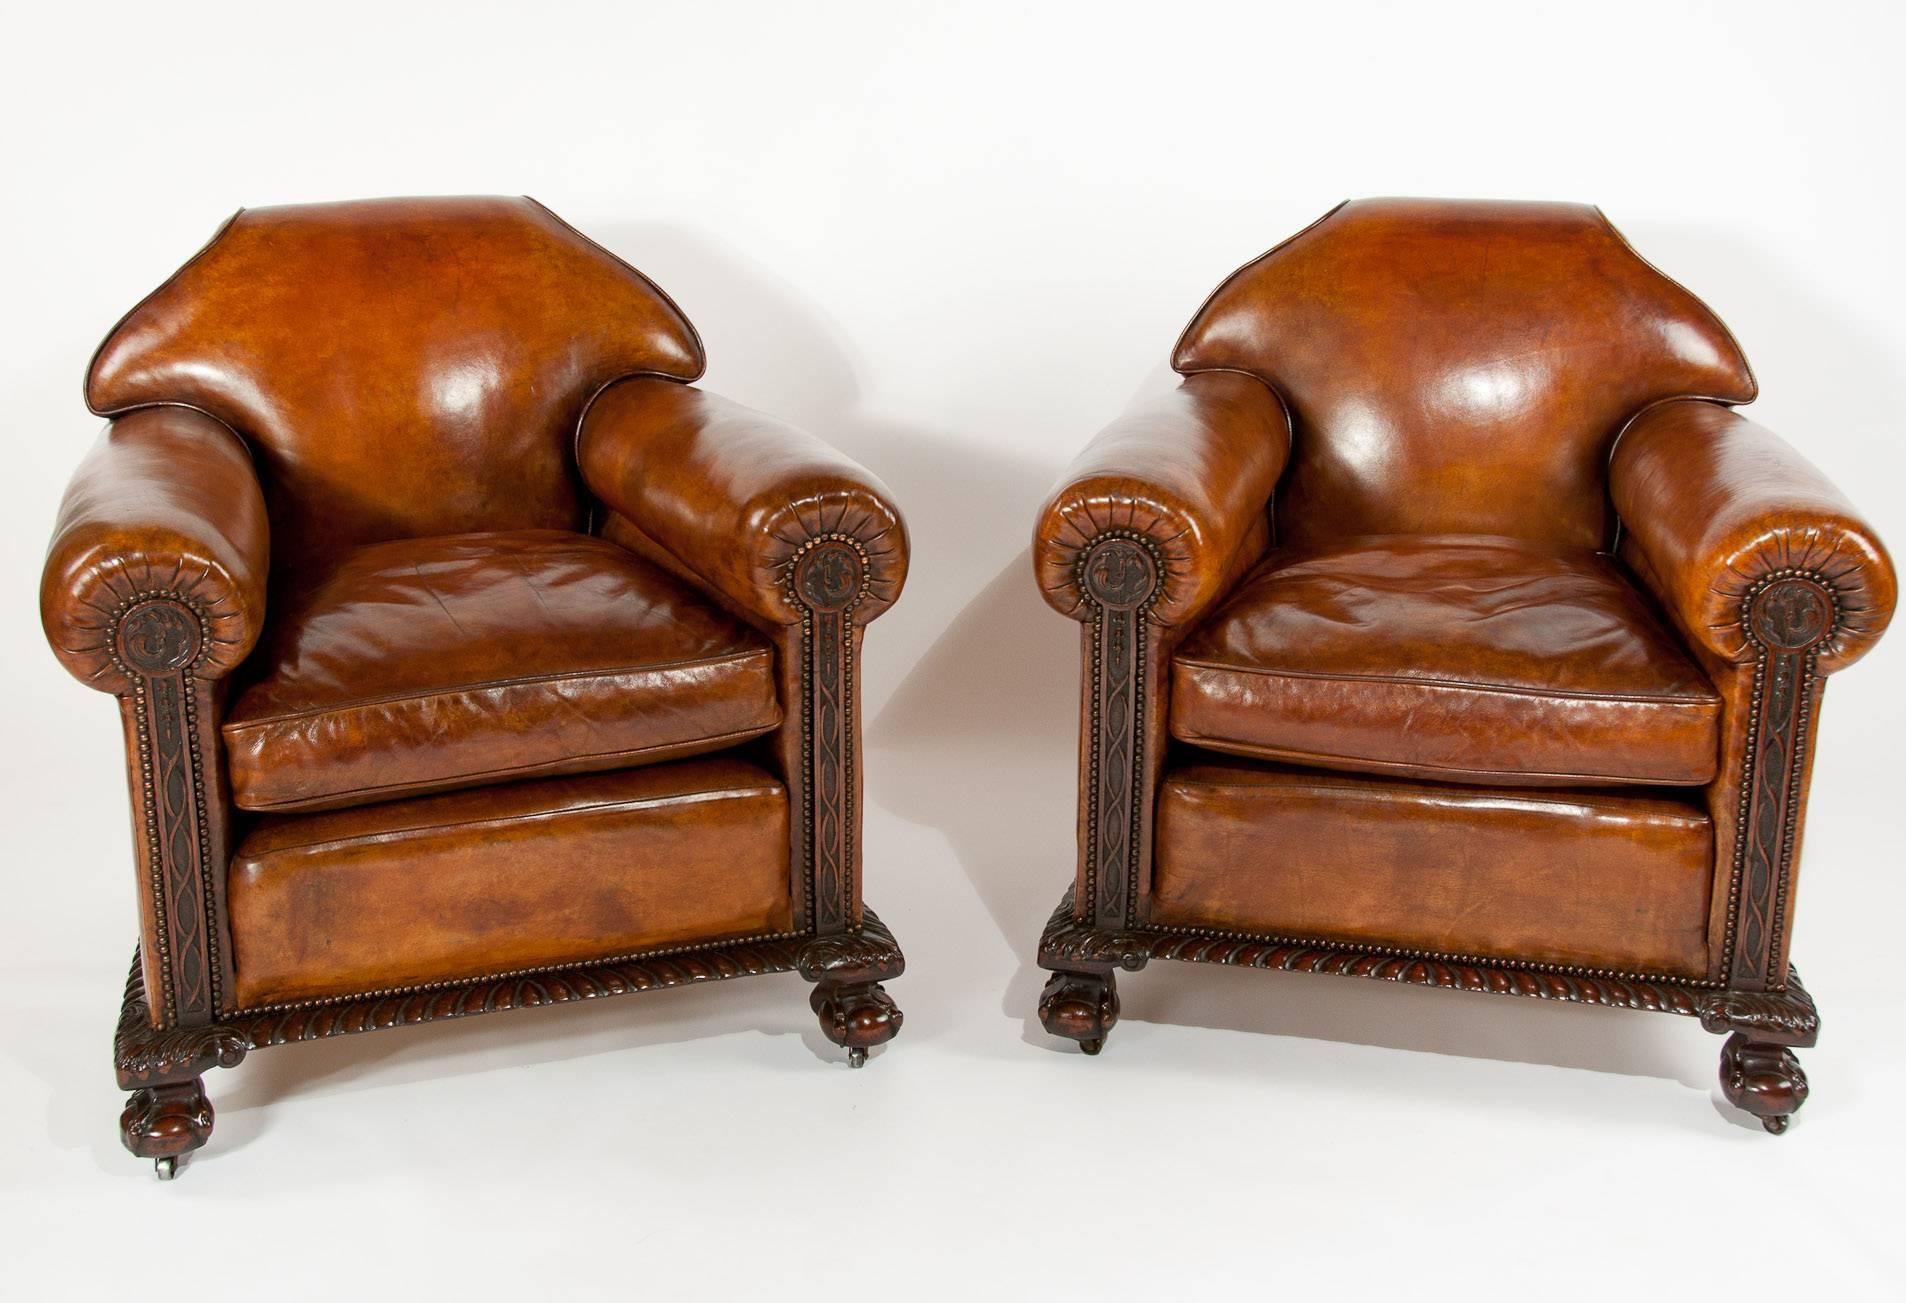 Chippendale Magnificent Victorian Leather Sofa and Chairs Three-Piece Suite